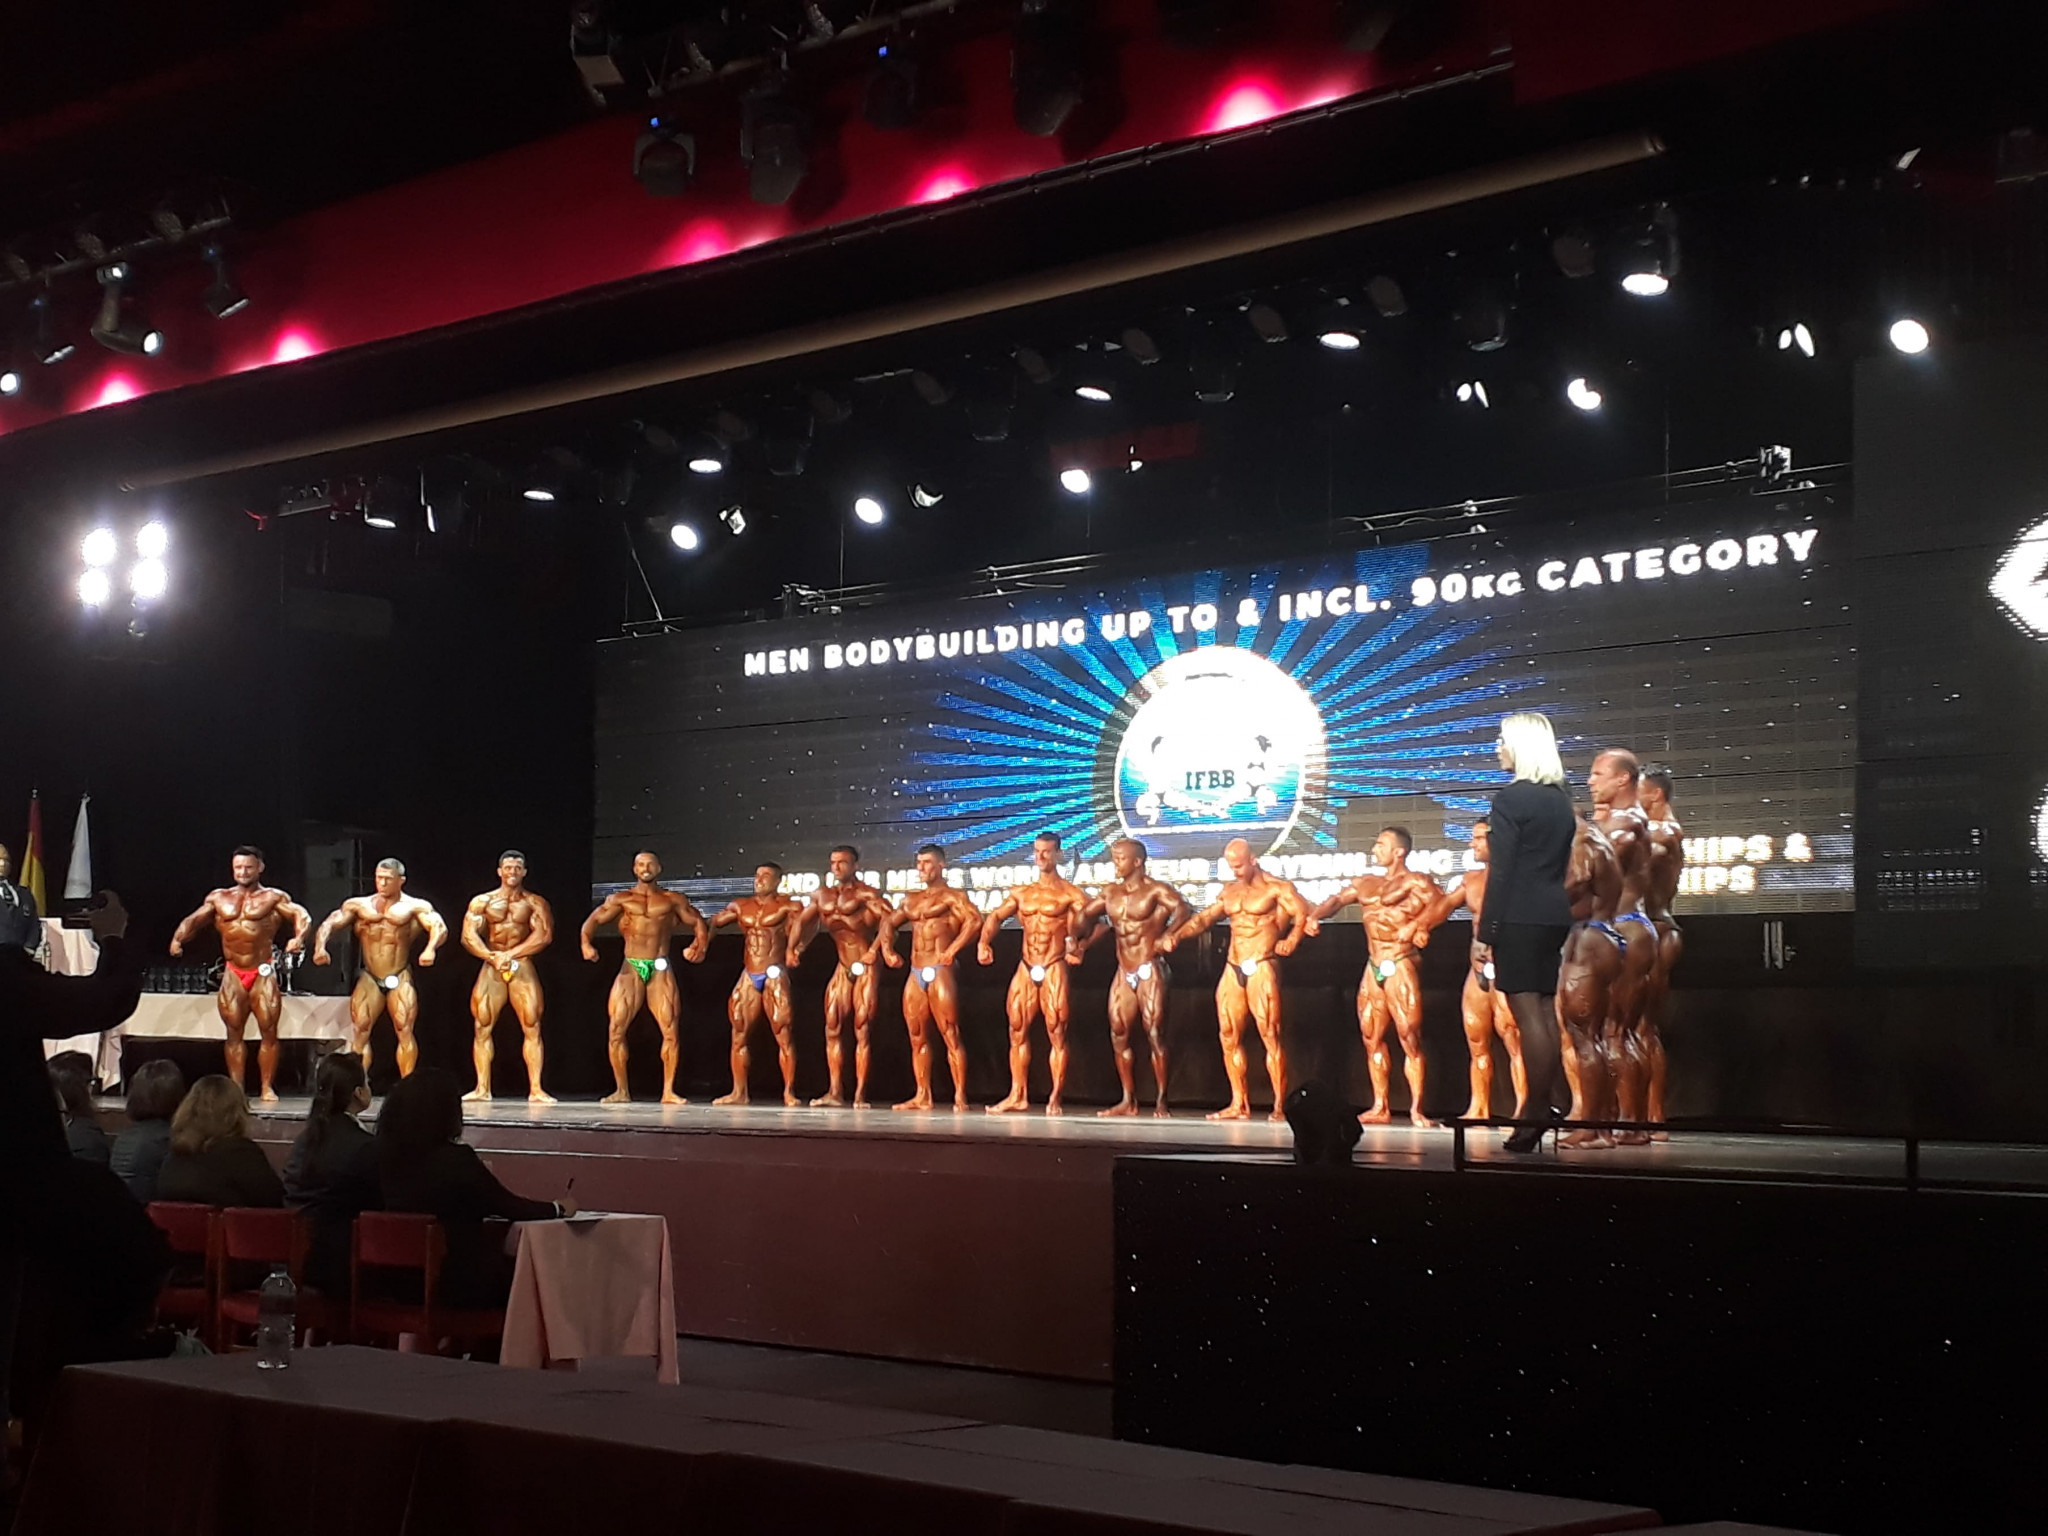 IFBB World Bodybuilding Championships: Day two of competition